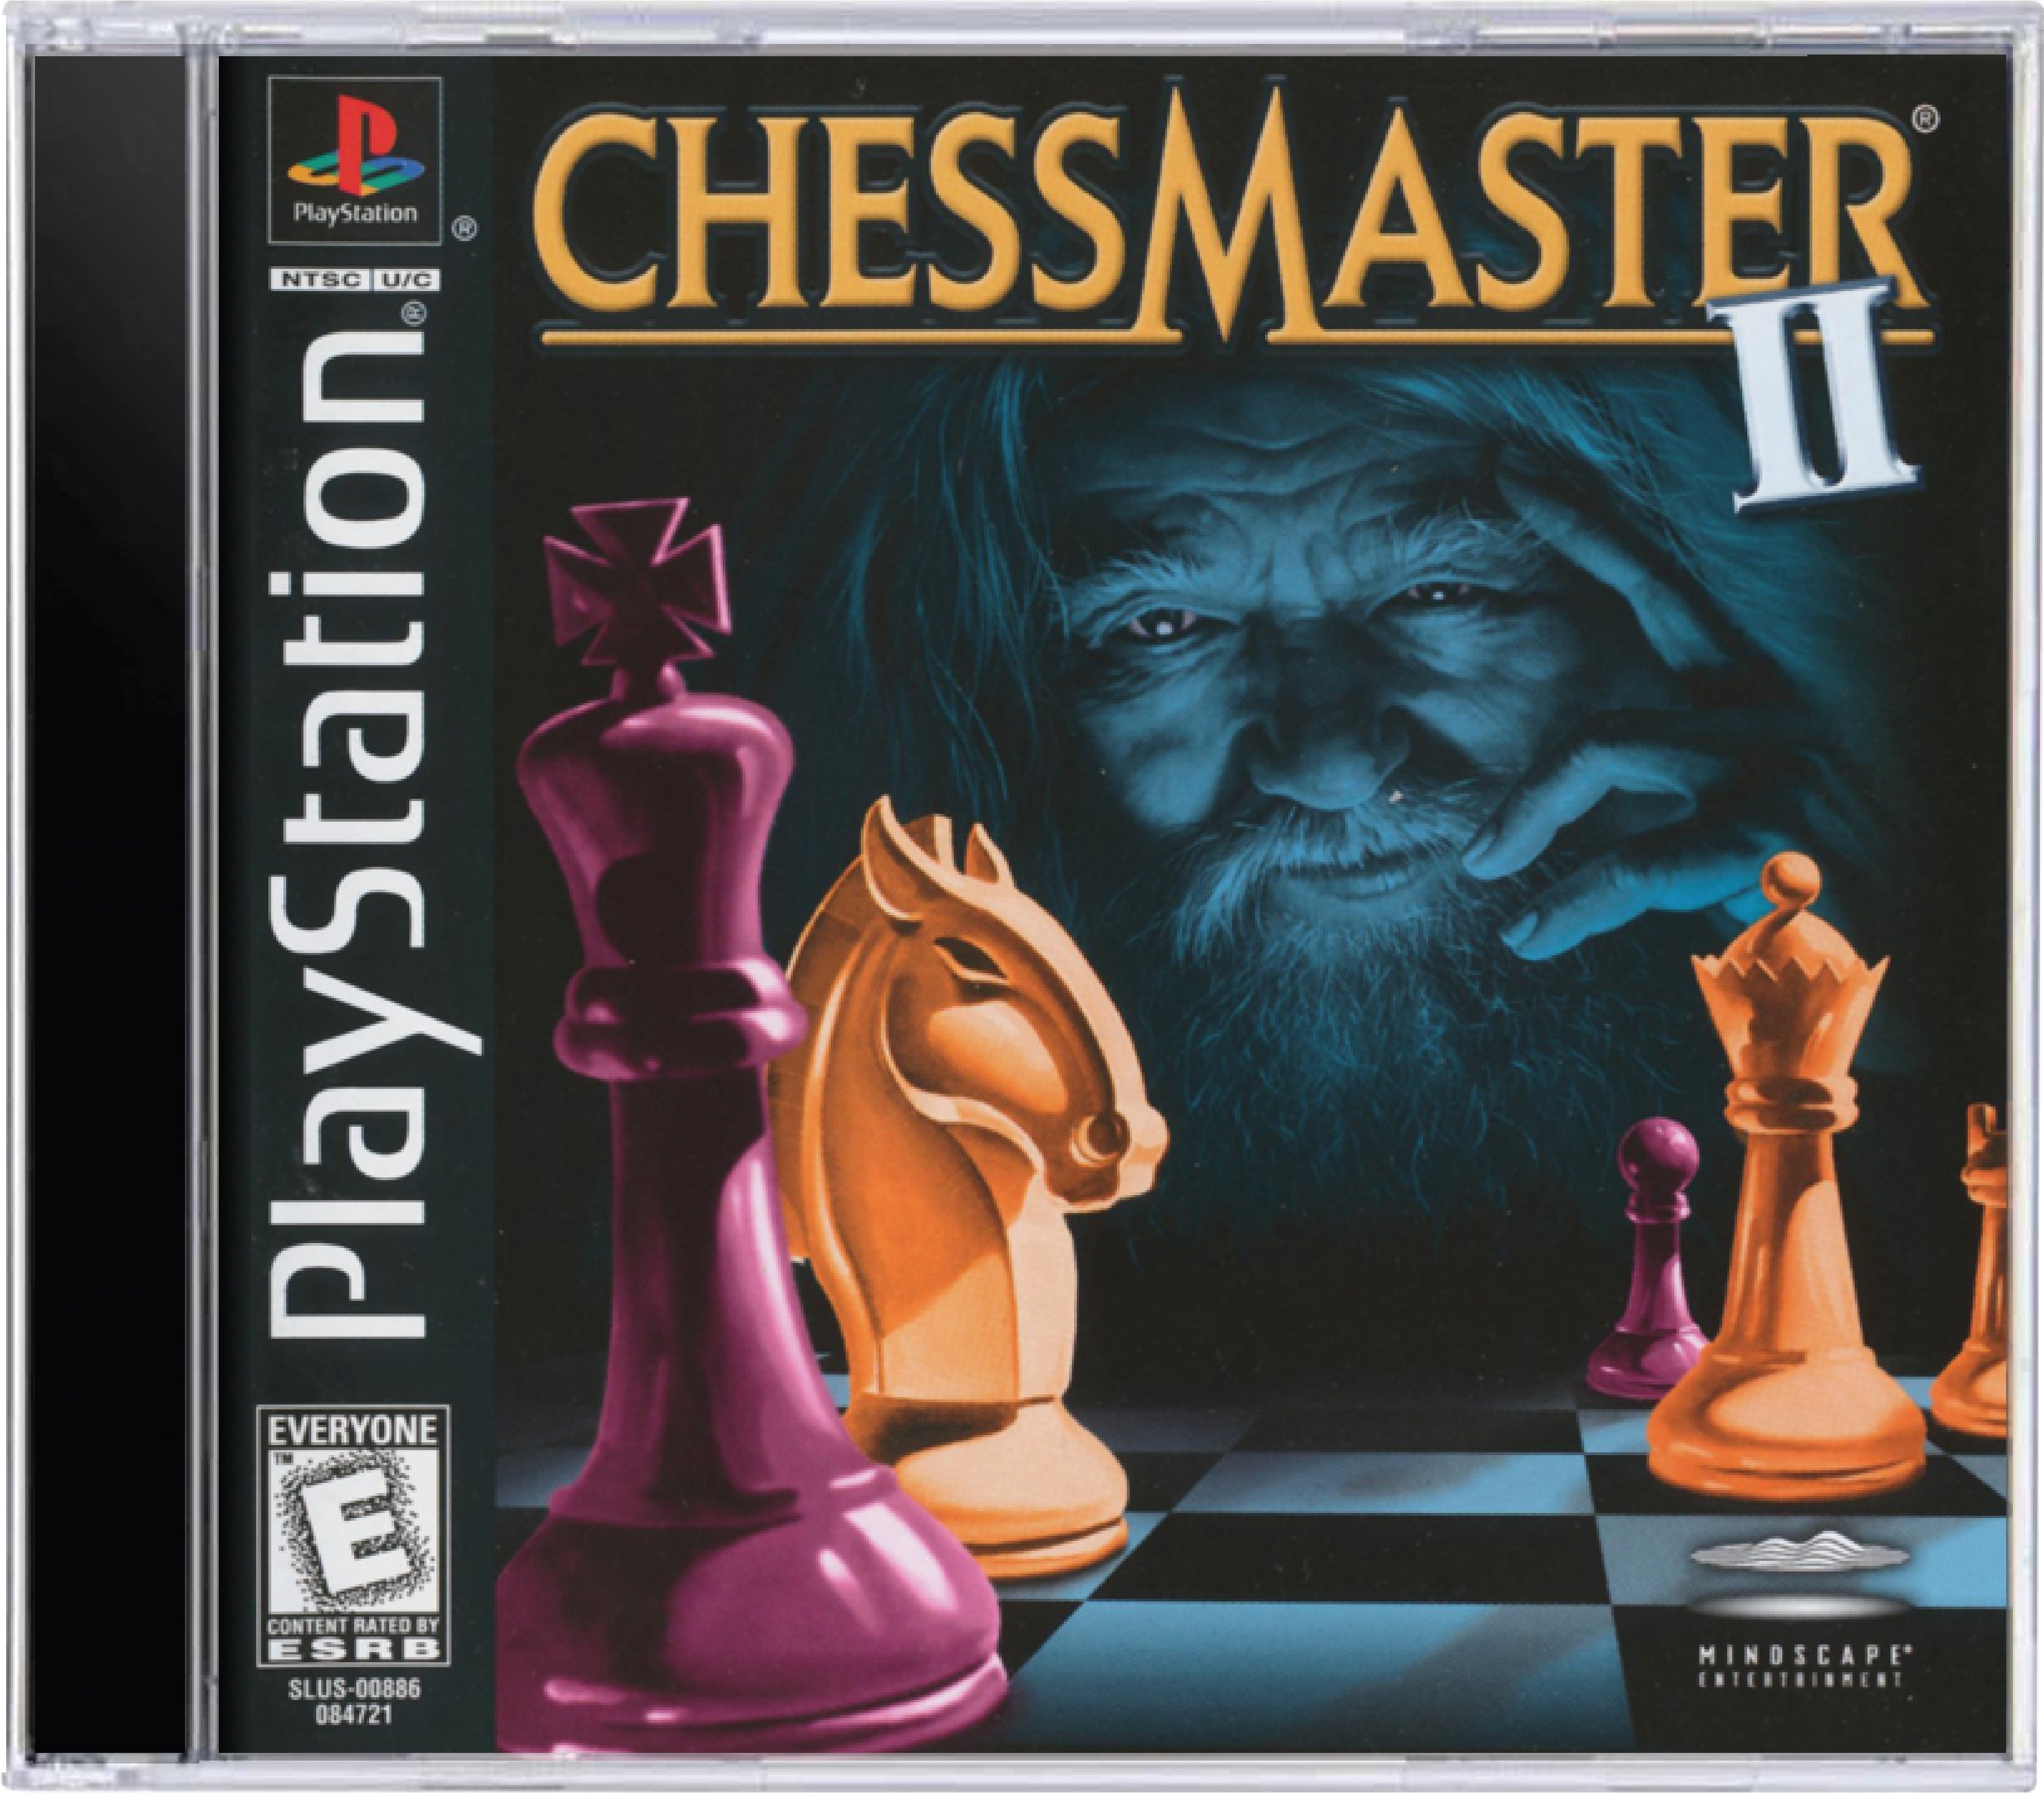 Chessmaster II Cover Art and Product Photo